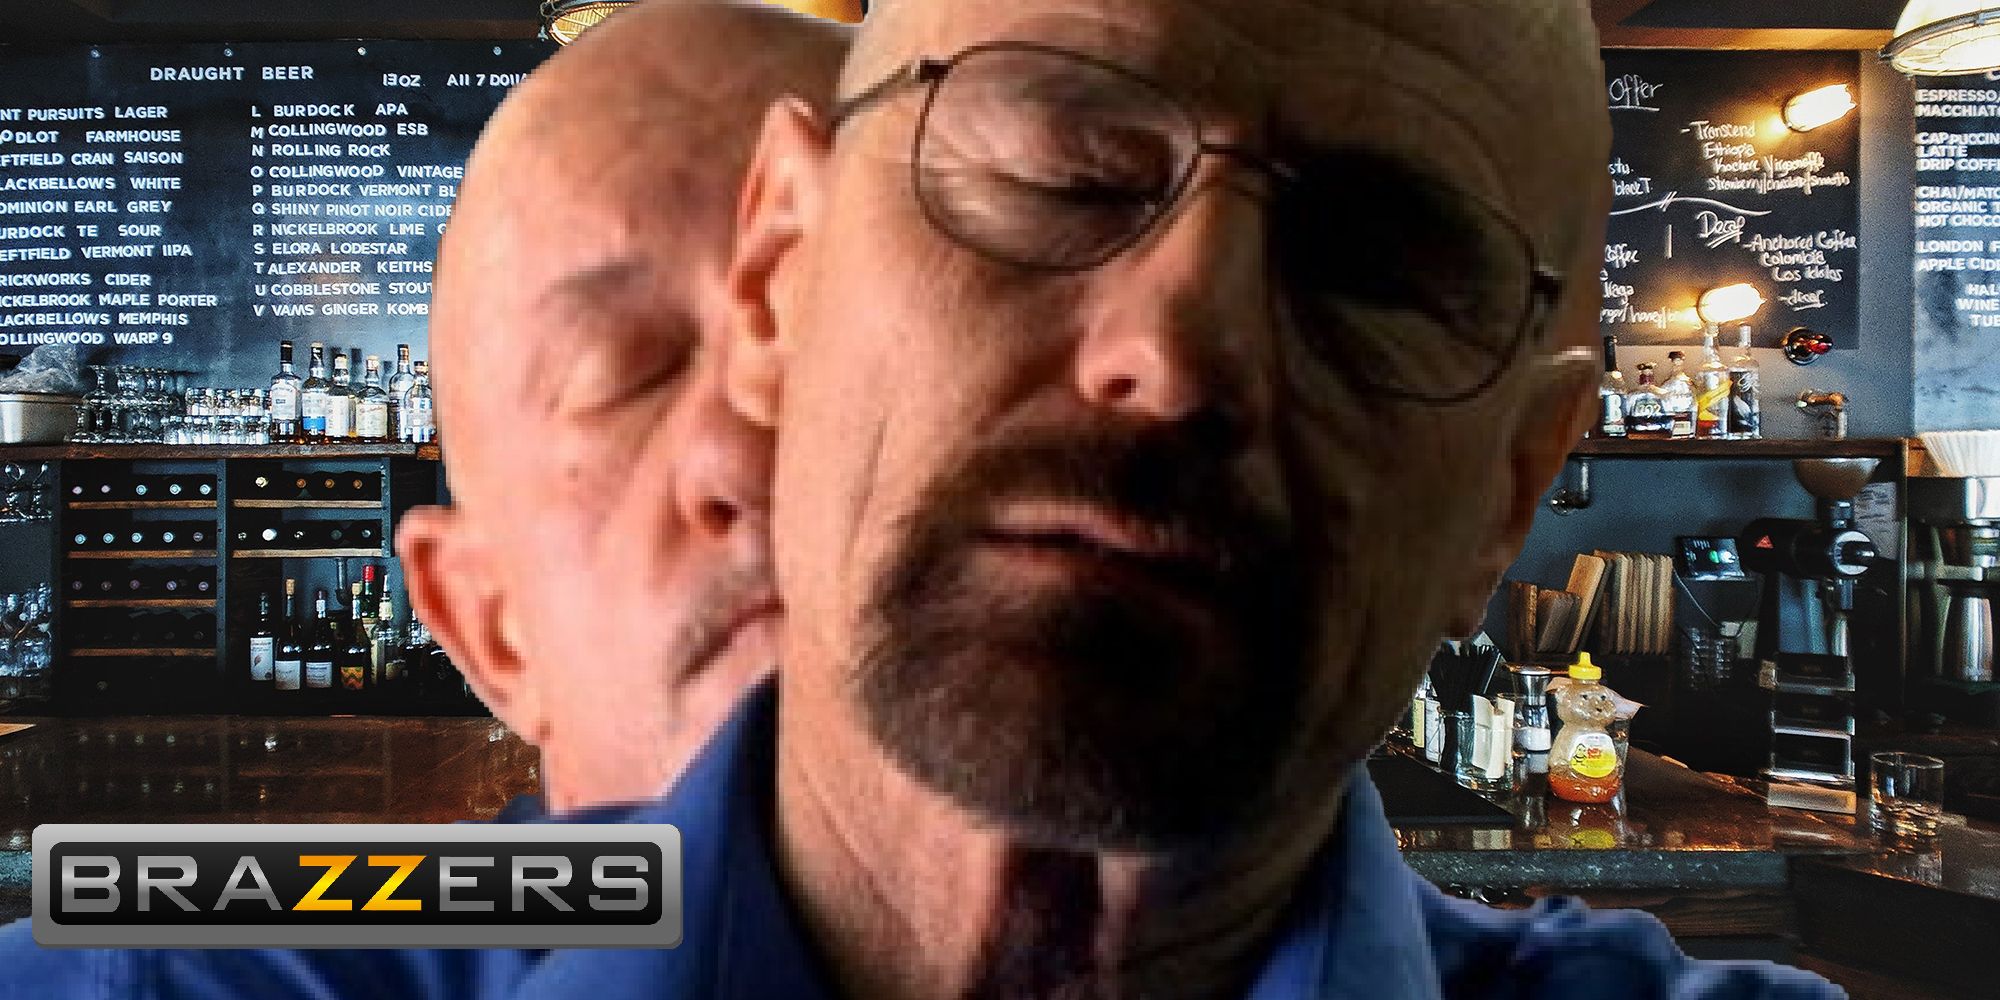 Breaking Bad Memes Are The Fandom At Its Absurdist Best